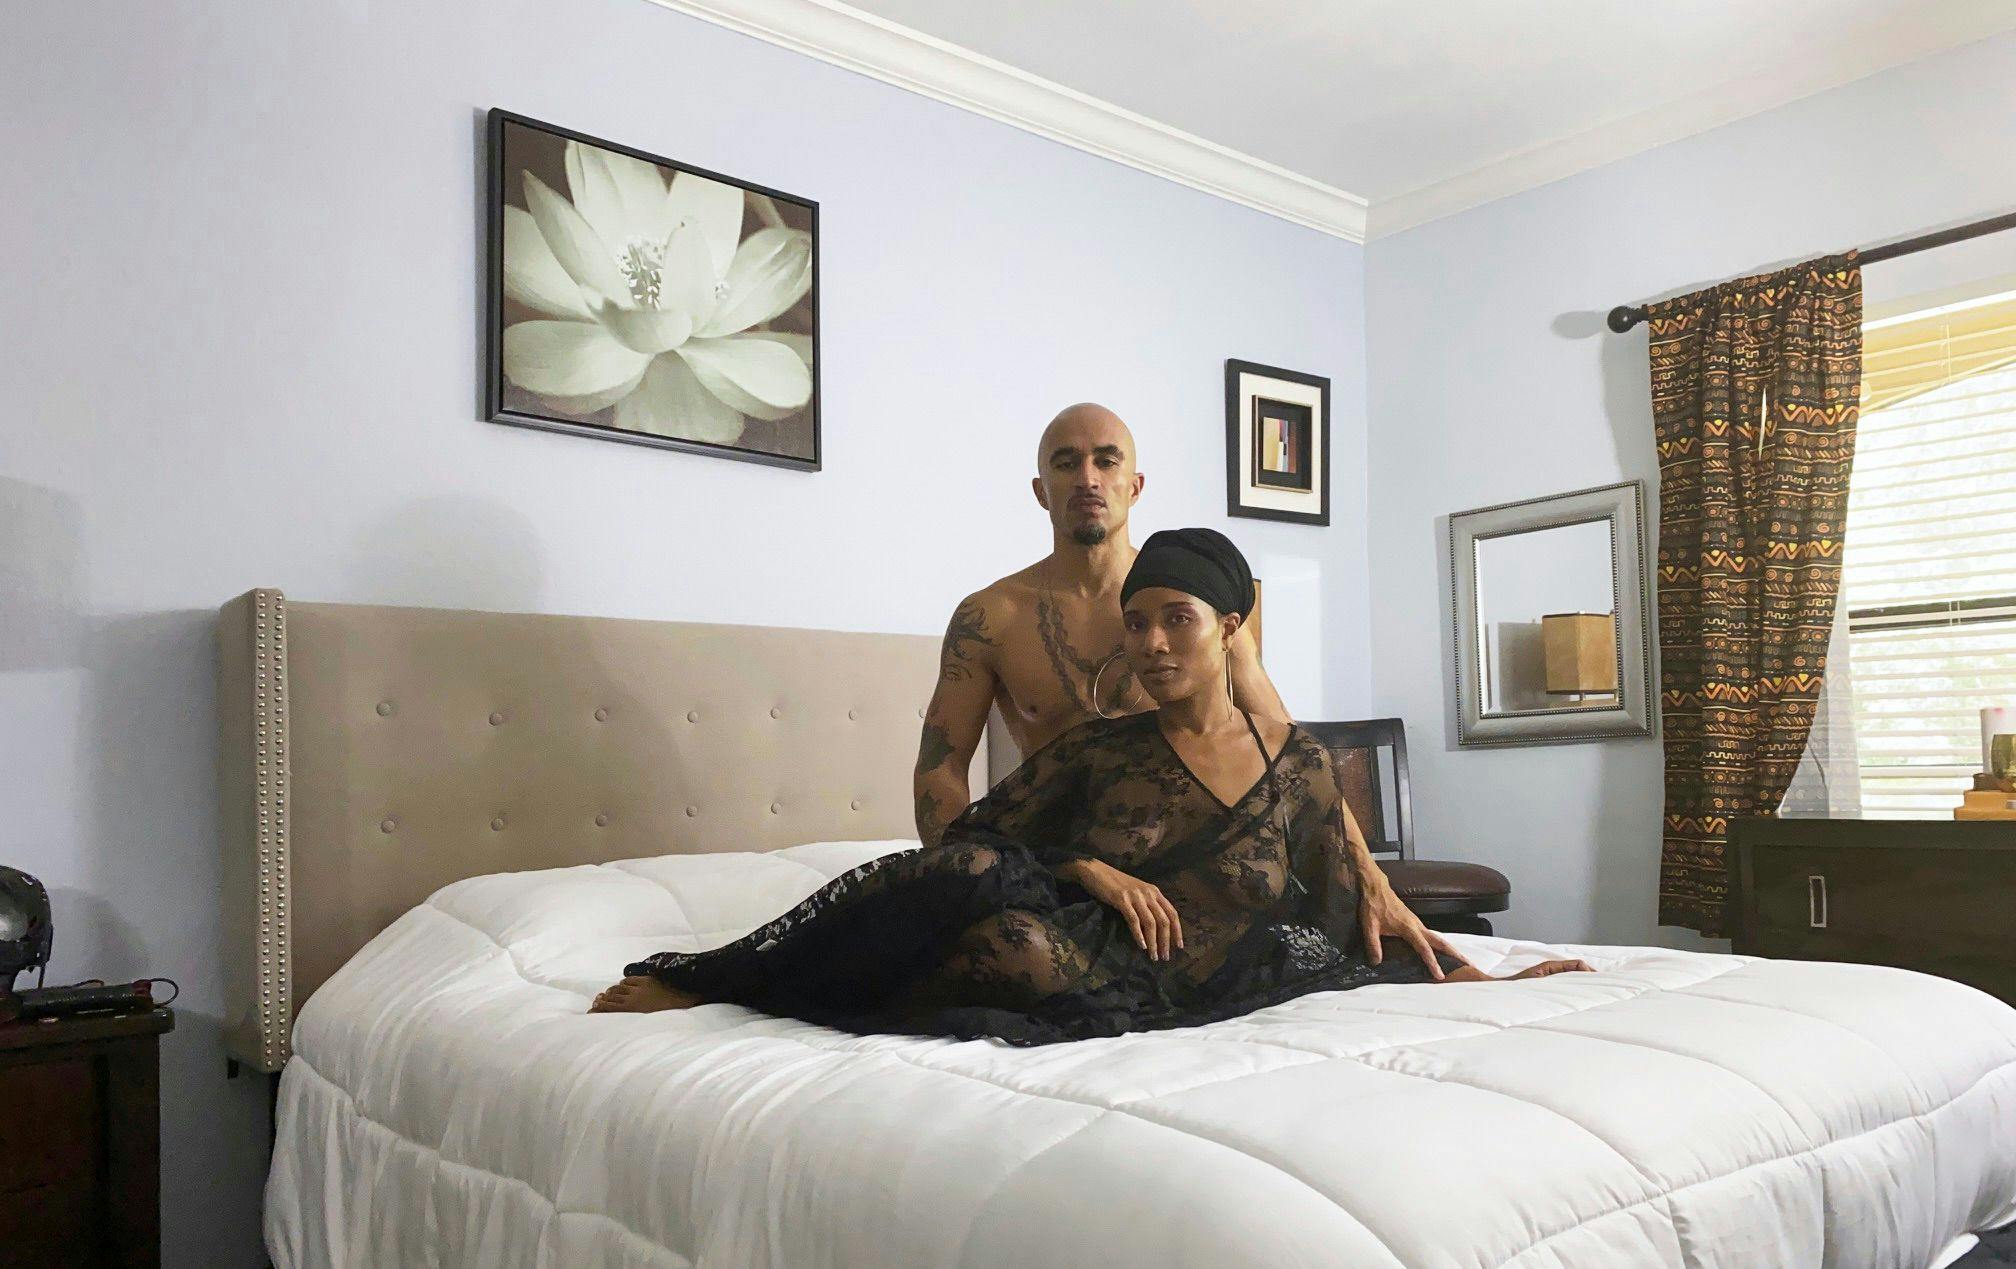 King Noire & Jet Setting Jasmine in a still of the explicit short film Sex and Love in the Time of Quarantine